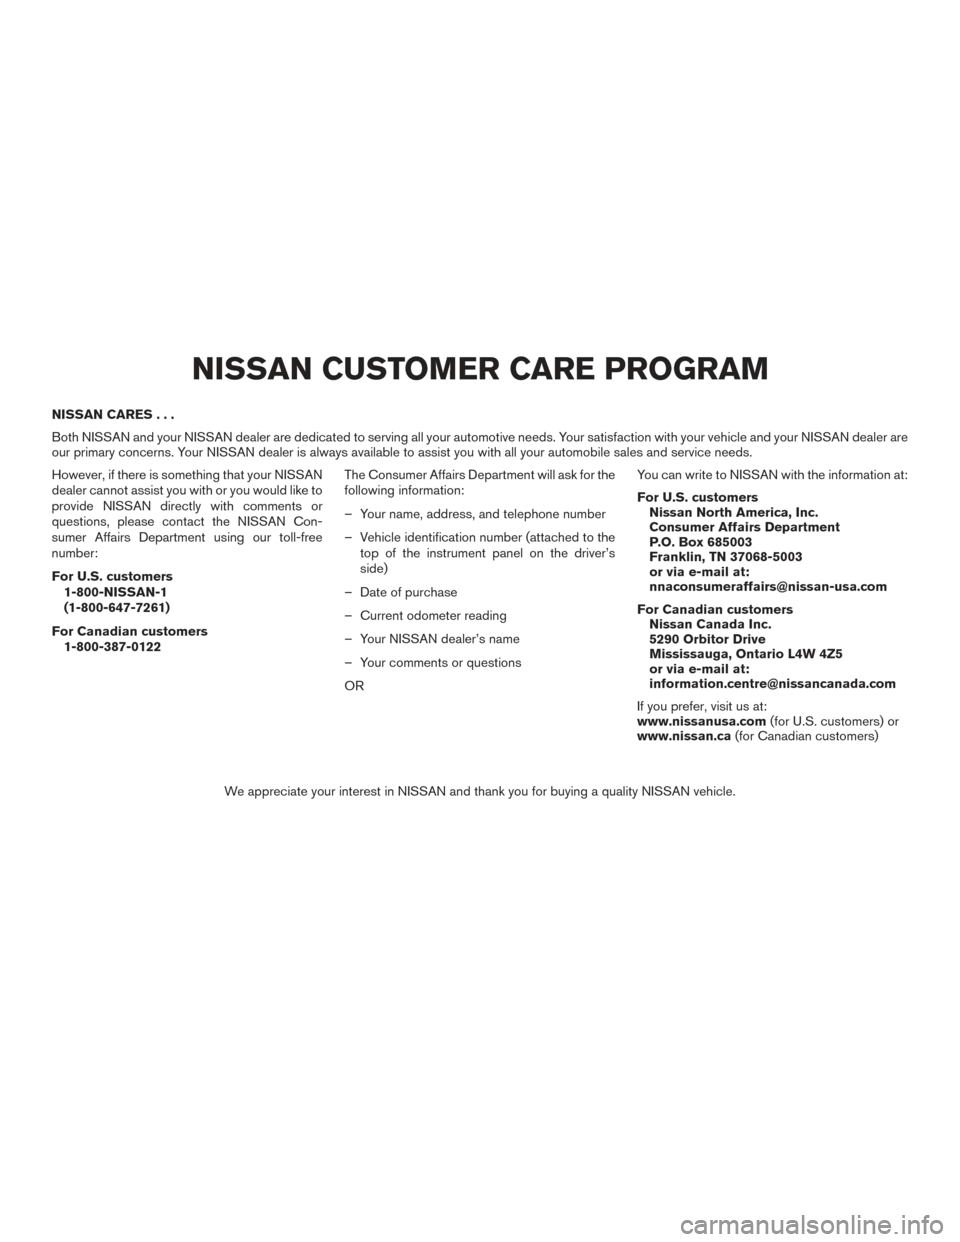 NISSAN PATHFINDER 2015 R52 / 4.G Owners Manual NISSAN CARES...
Both NISSAN and your NISSAN dealer are dedicated to serving all your automotive needs. Your satisfaction with your vehicle and your NISSAN dealer are
our primary concerns. Your NISSAN 